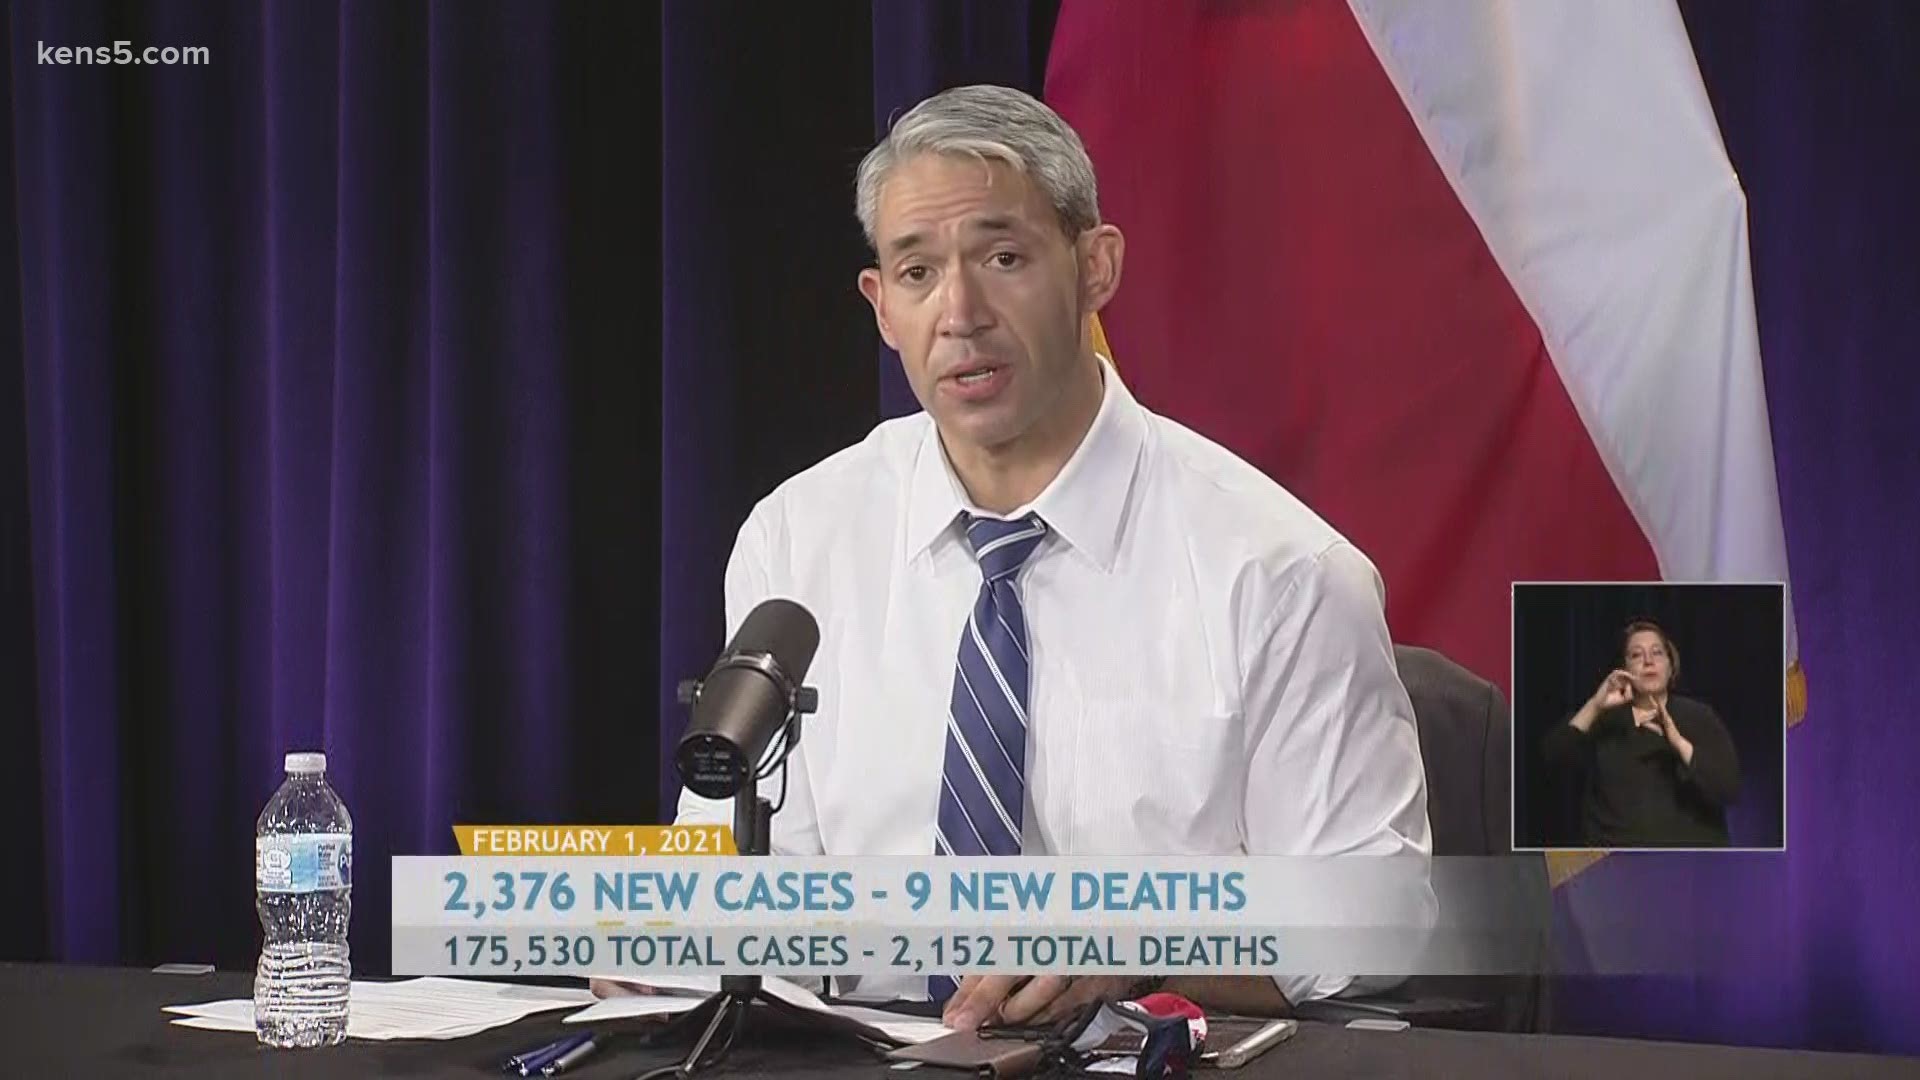 Mayor Nirenberg reported 2,376 new cases, bringing the total to 175,530. He also reported 9 new deaths, bringing the local death toll to 2,152.